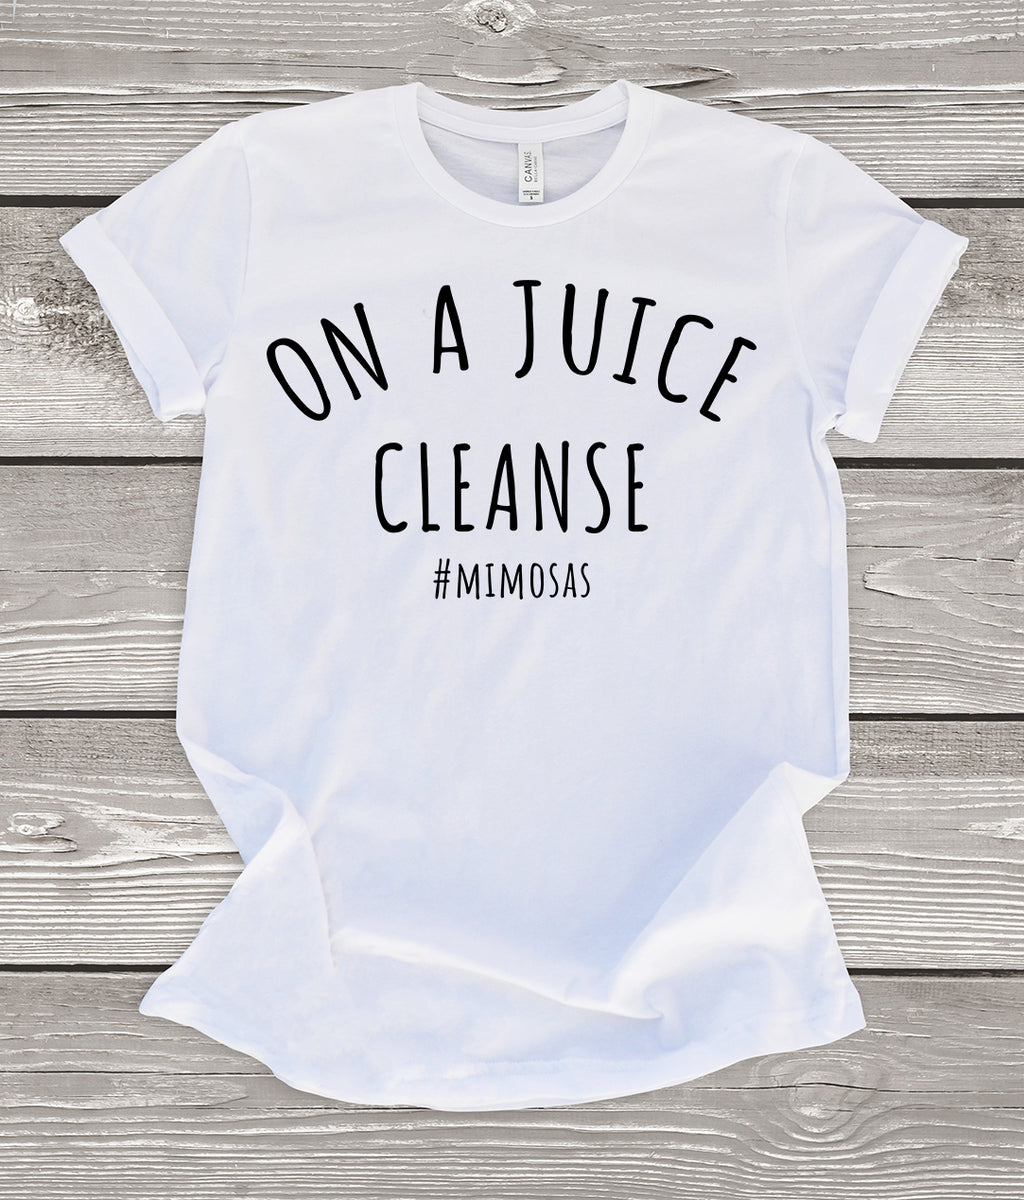 On a Juice Cleanse T-Shirt